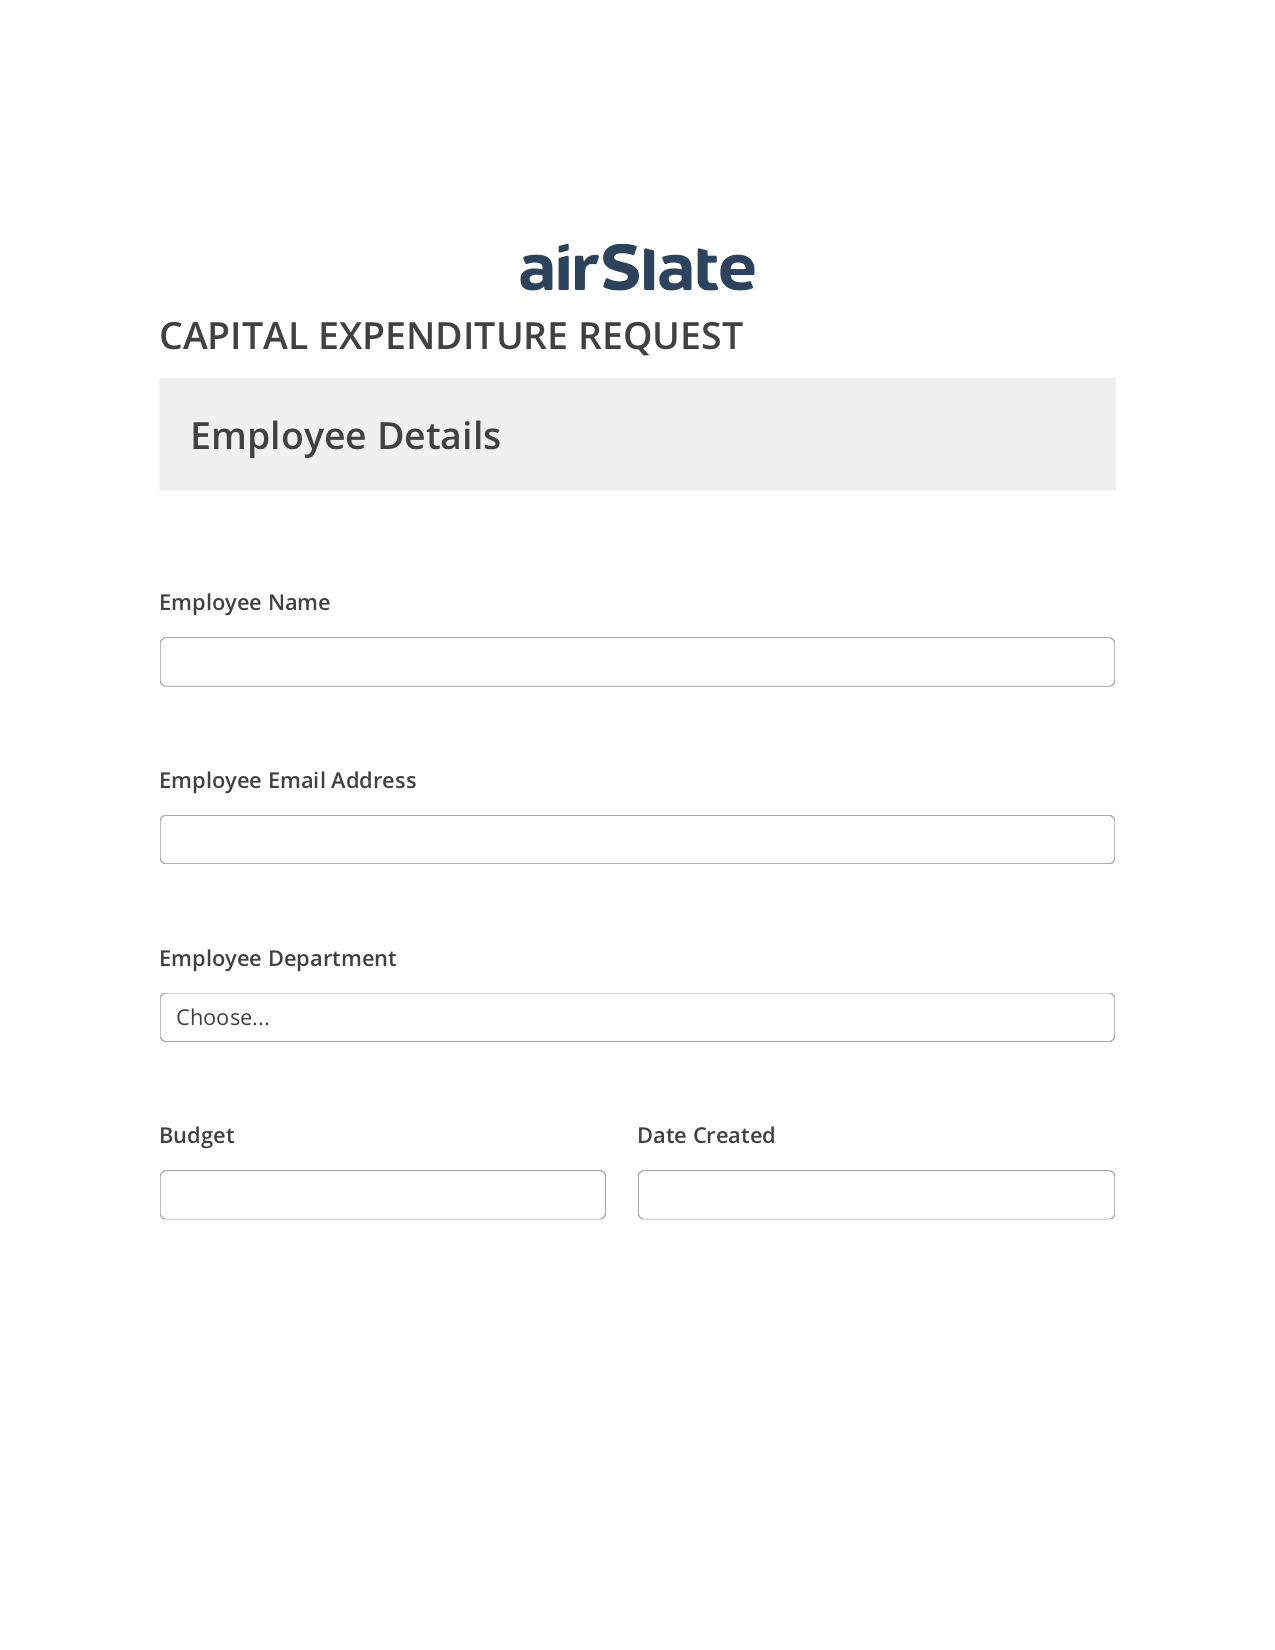 Capital Expenditure Request Approval Workflow Pre-fill from Google Sheet Dropdown Options Bot, Create slate bot, Email Notification Postfinish Bot